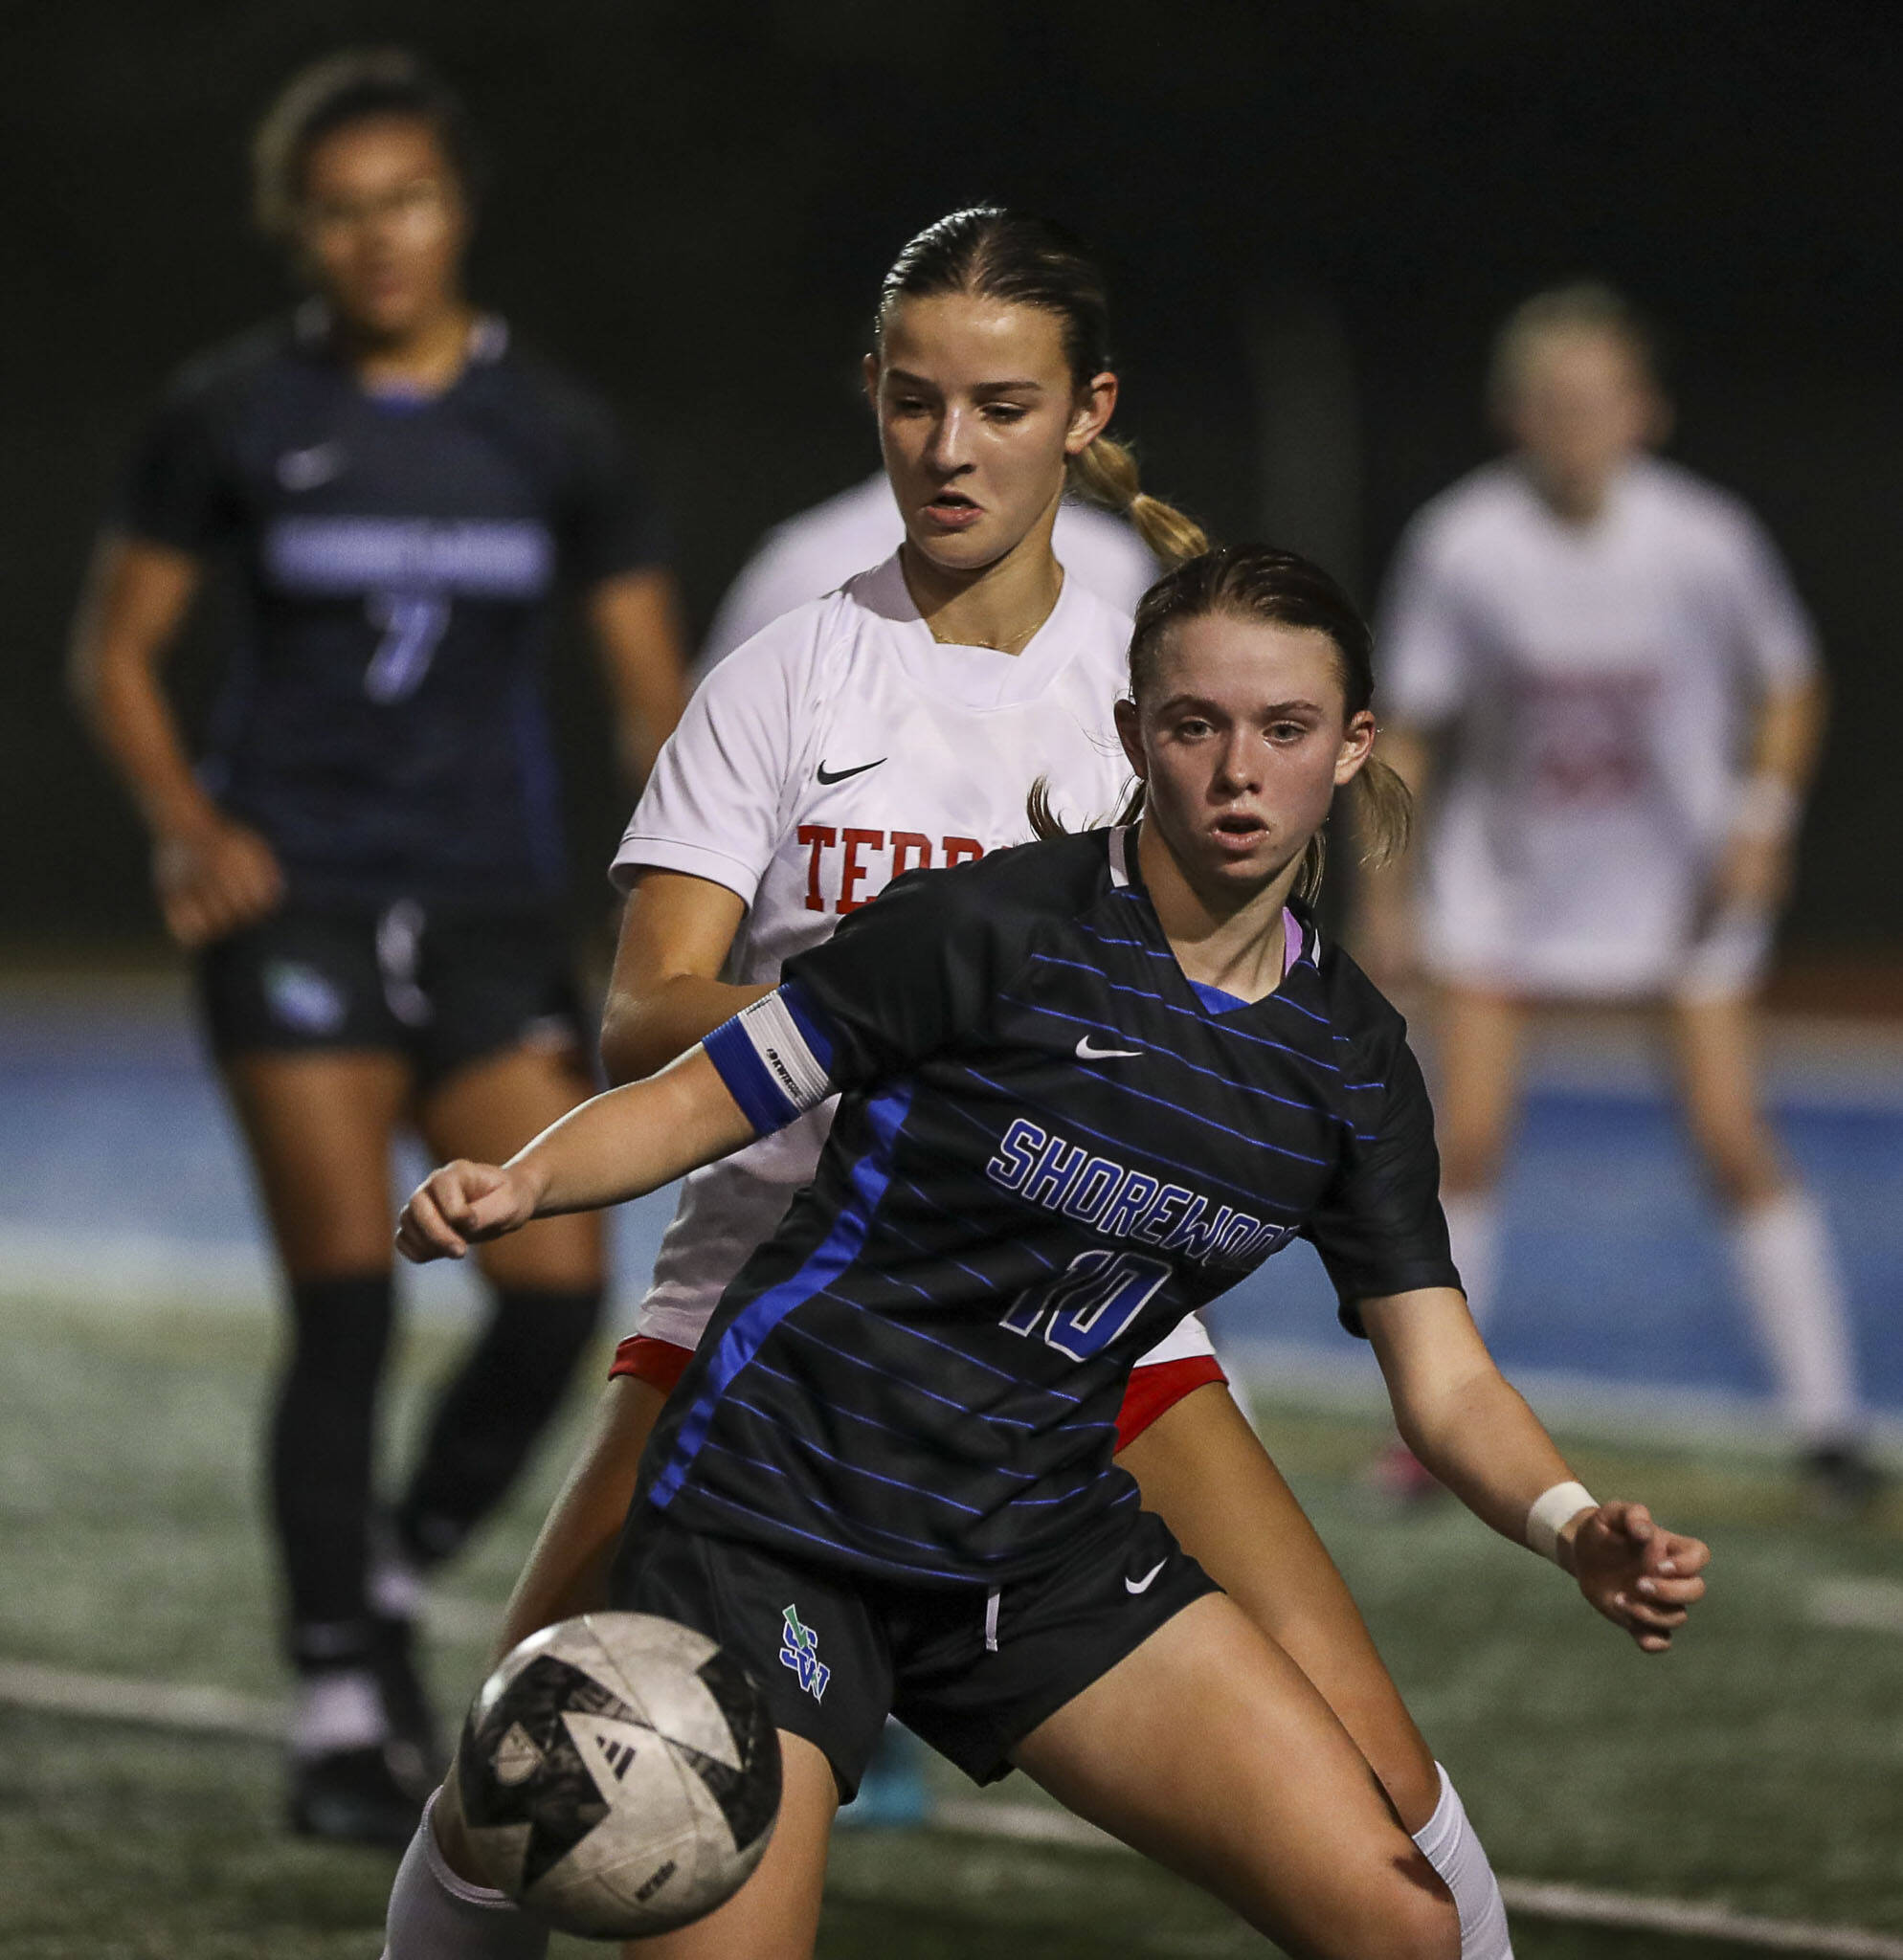 Shorewood’s Amelia Severn (10) moves with the ball during a soccer game between Shorewood and Mountlake Terrace at Shorewood Stadium in Shoreline, Washington on Thursday, Oct. 19, 2023. Shorewood won, 4-0. (Annie Barker / The Herald)